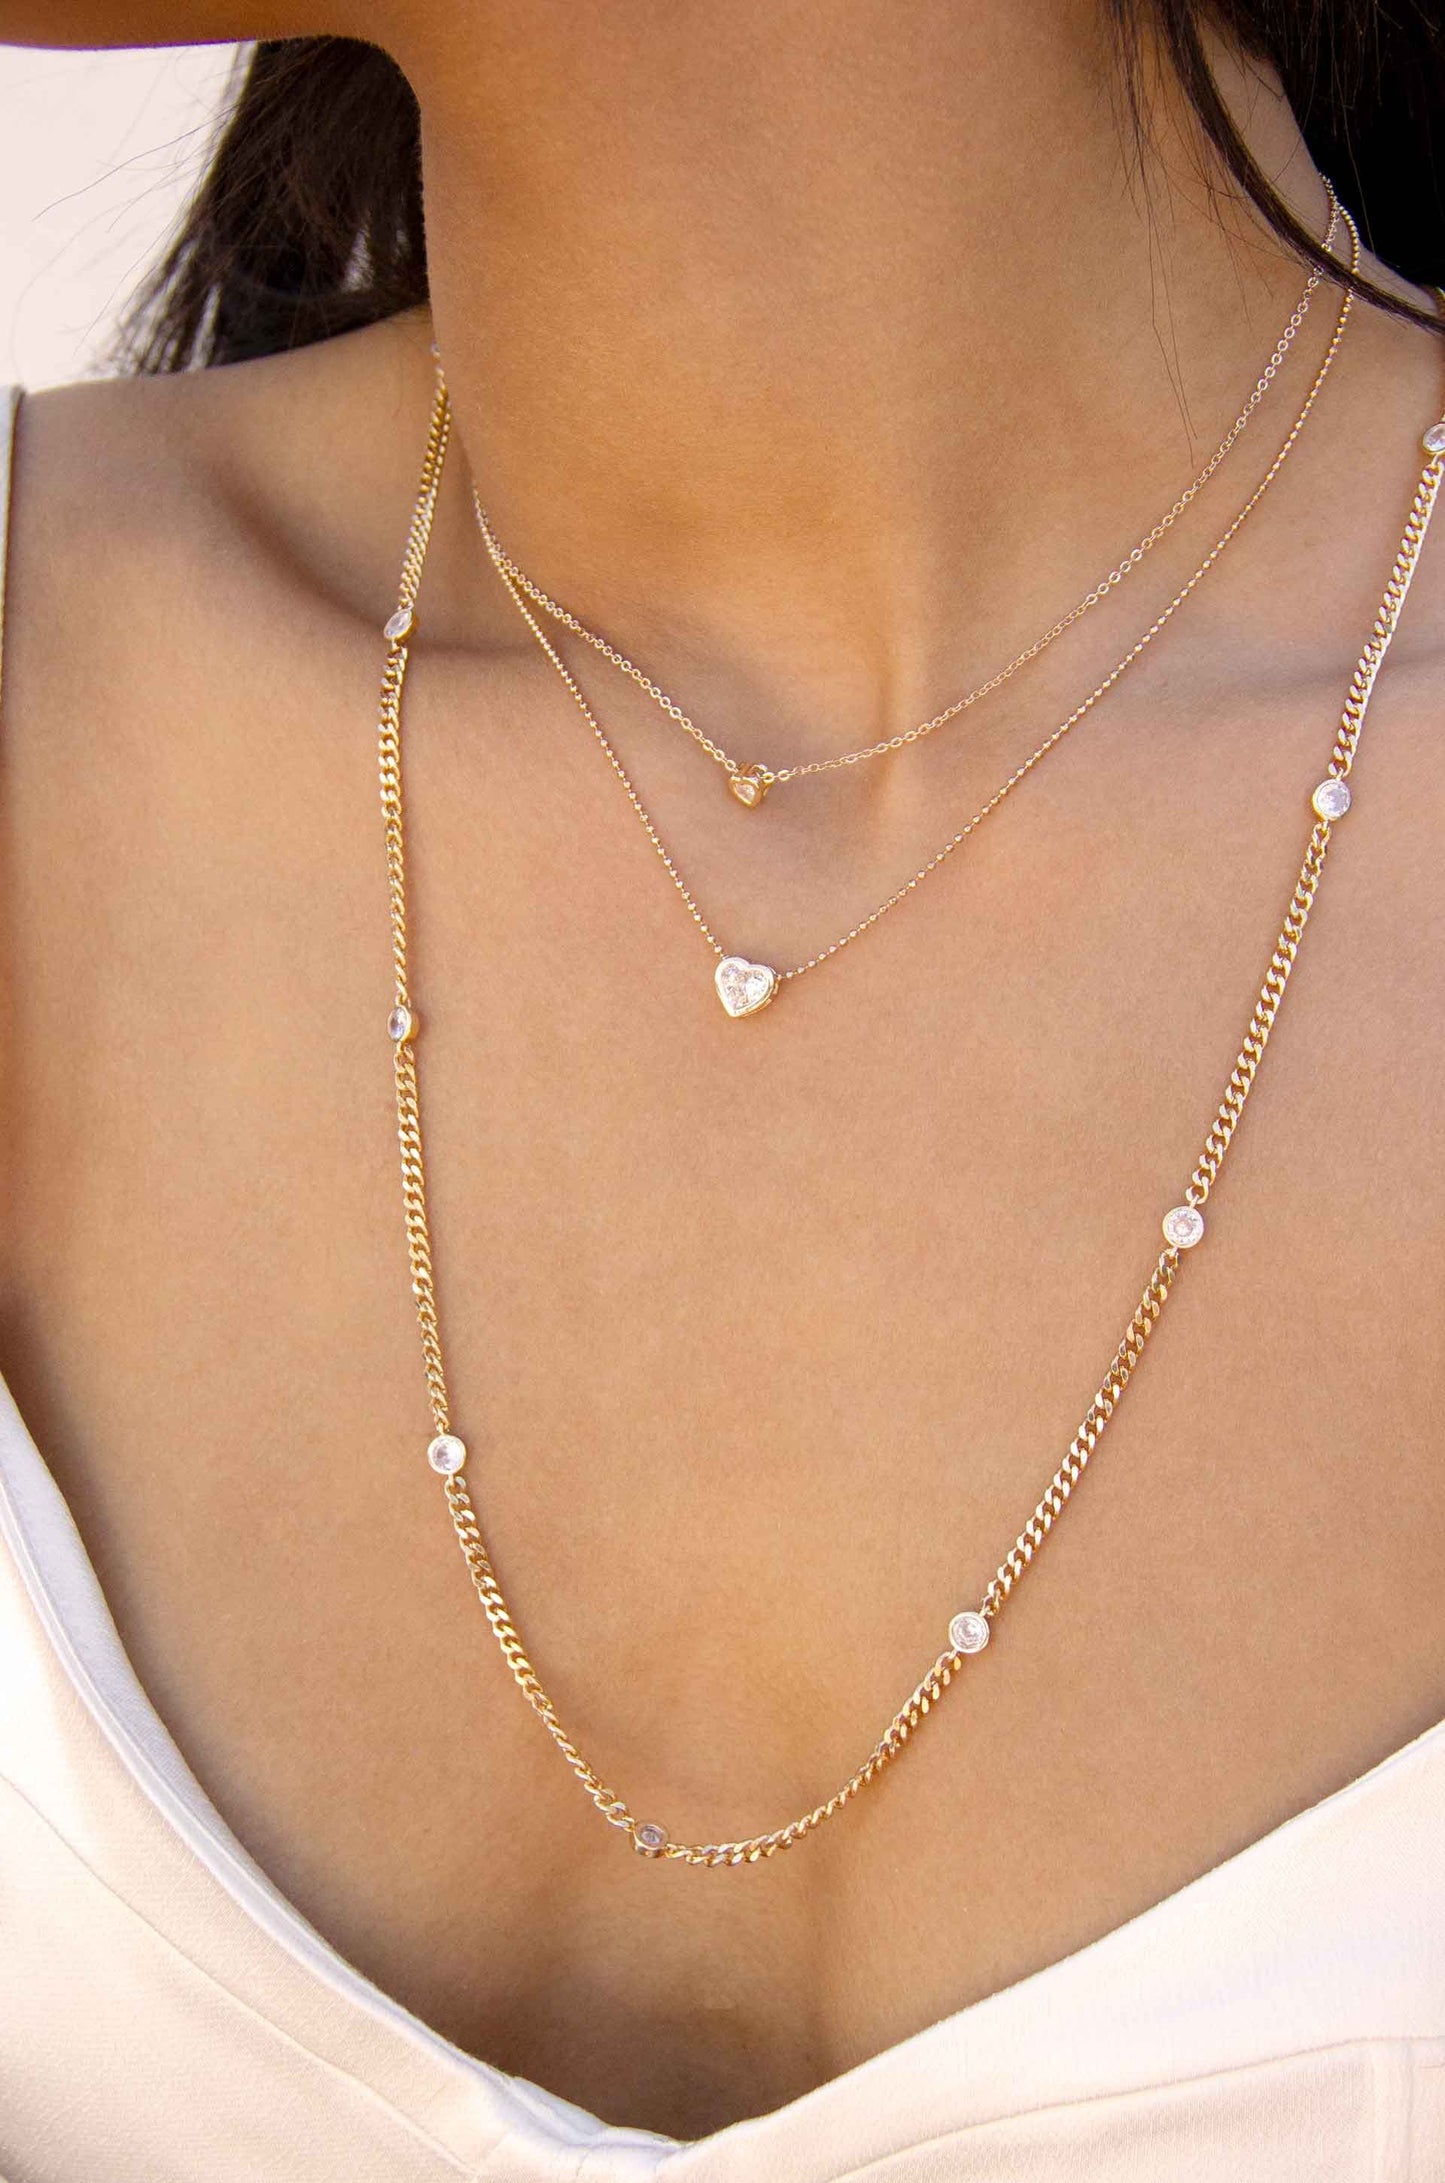 Simple Kind of Life Dainty 18k Gold Plated Chain and Crystal Layered Necklace Set on a model